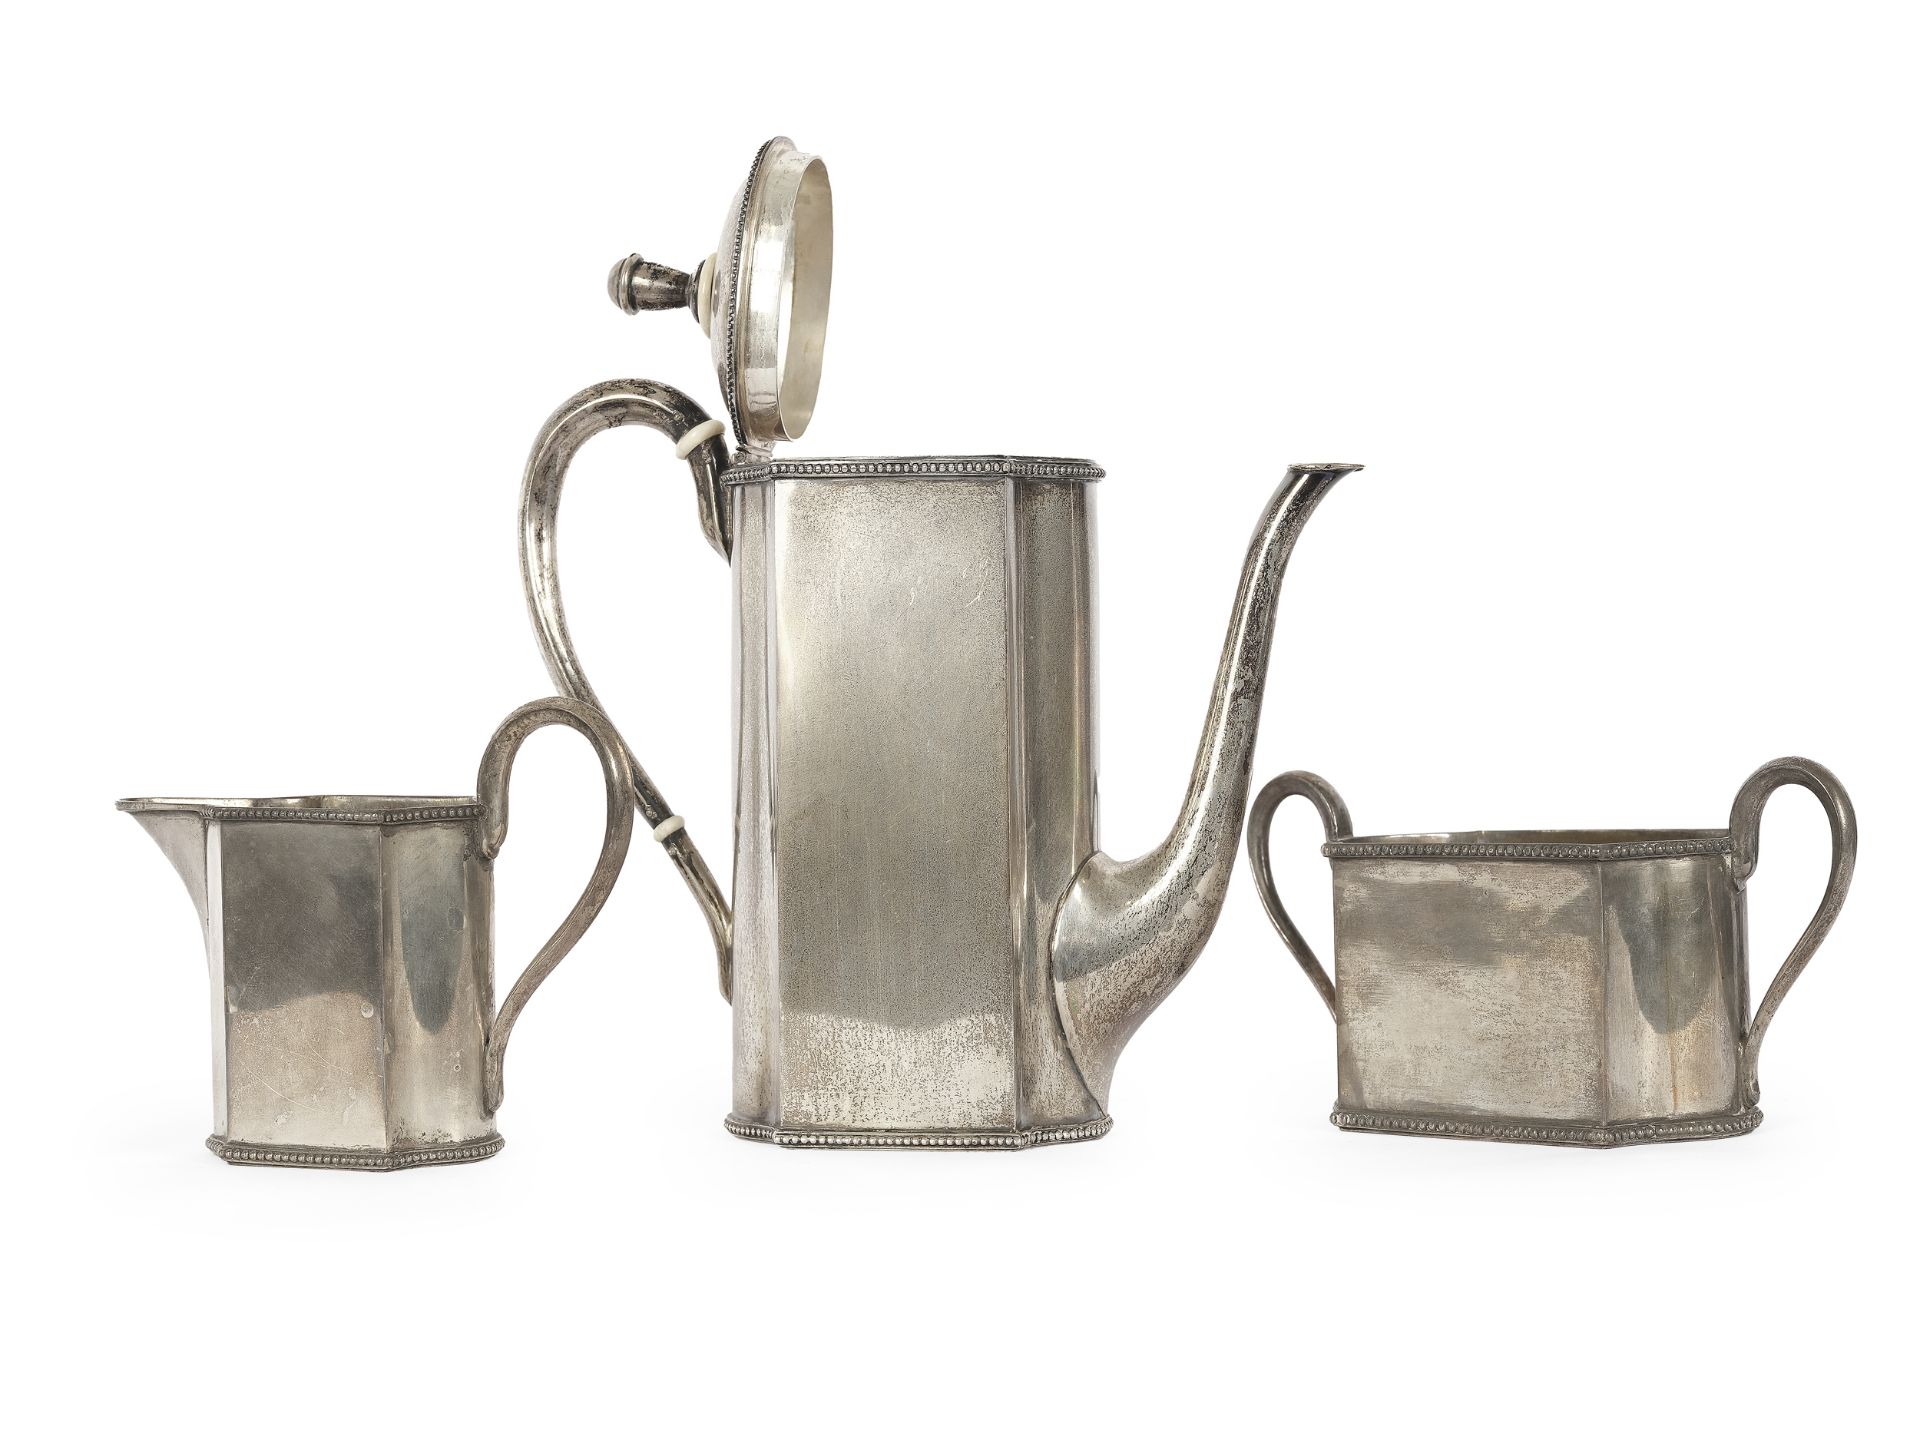 Three-piece silver set for mocha - Image 2 of 4